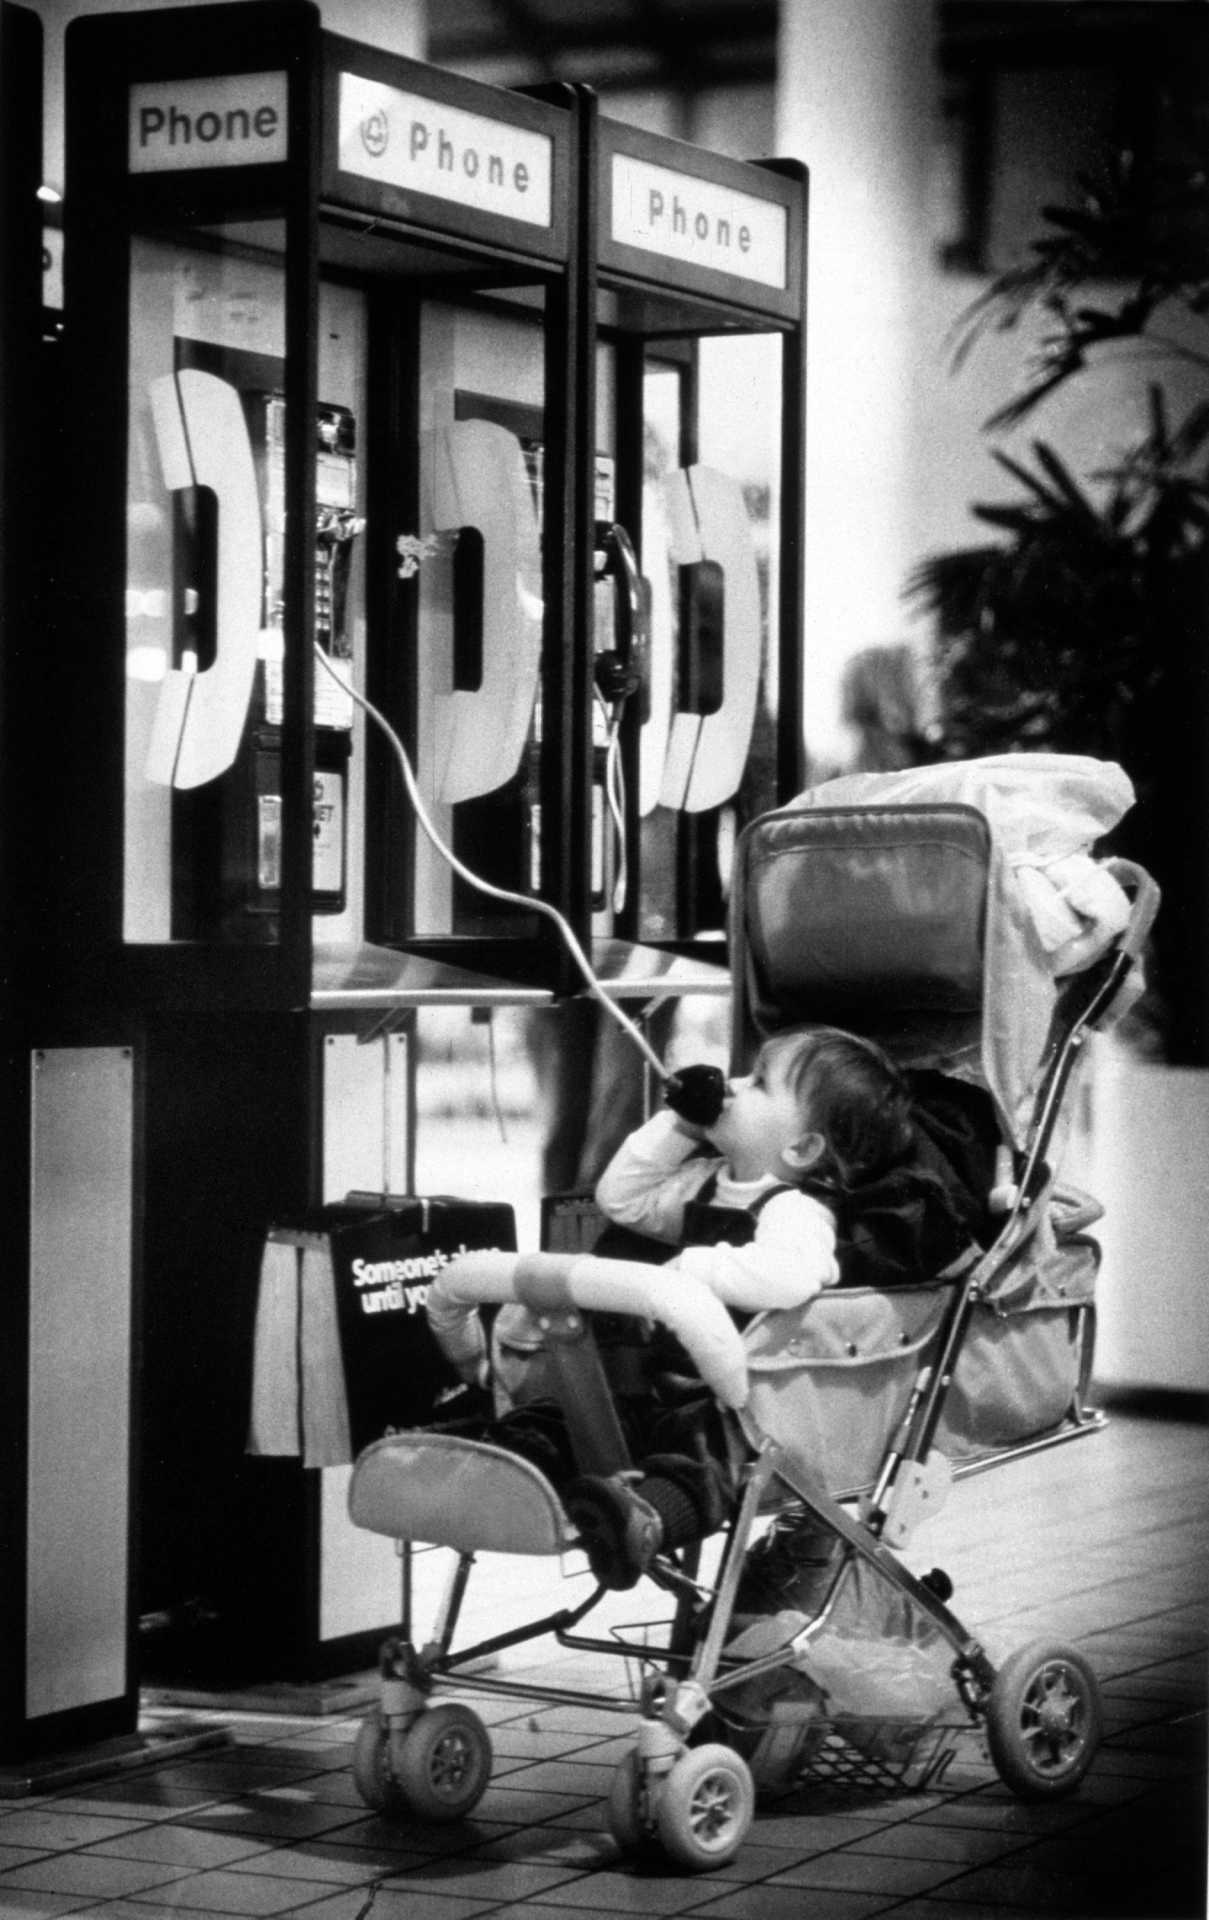  A young child uses the pay phone at the Danbury Fair Mall. 1987